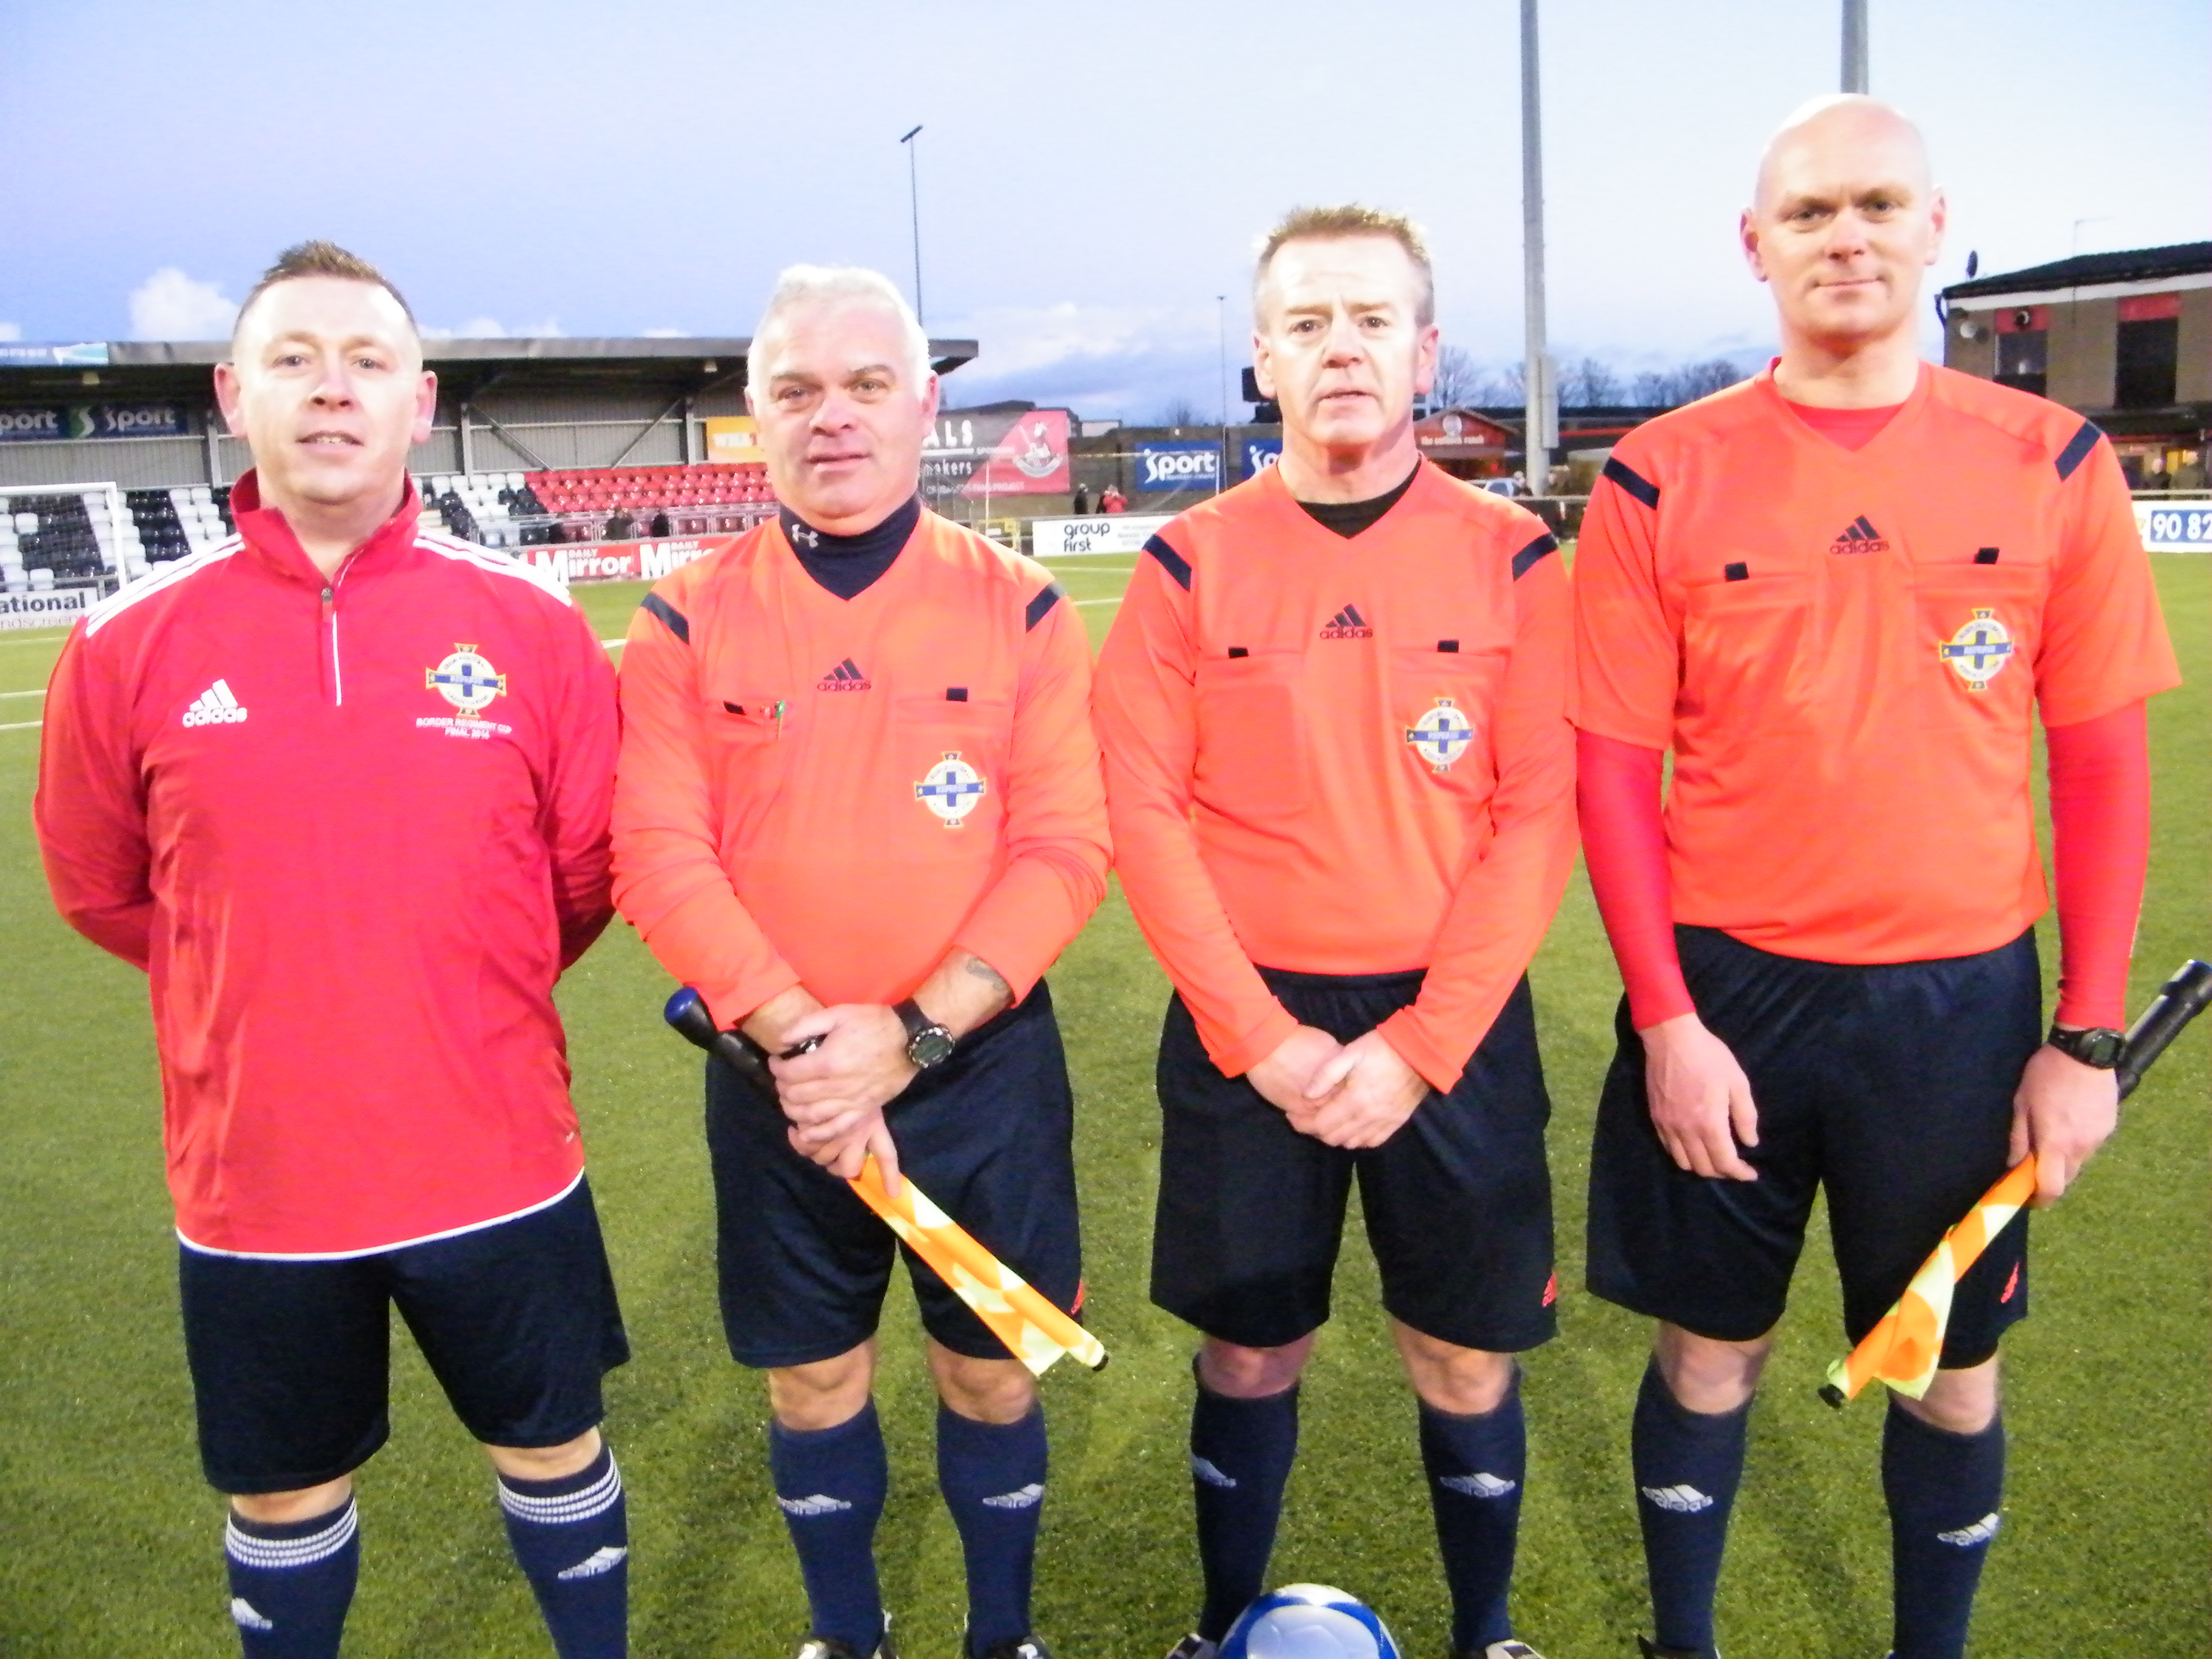 Match officials Referee Trevor Moutray with his assistants Iain Banks,Tony Clarke and Stephen McDonald